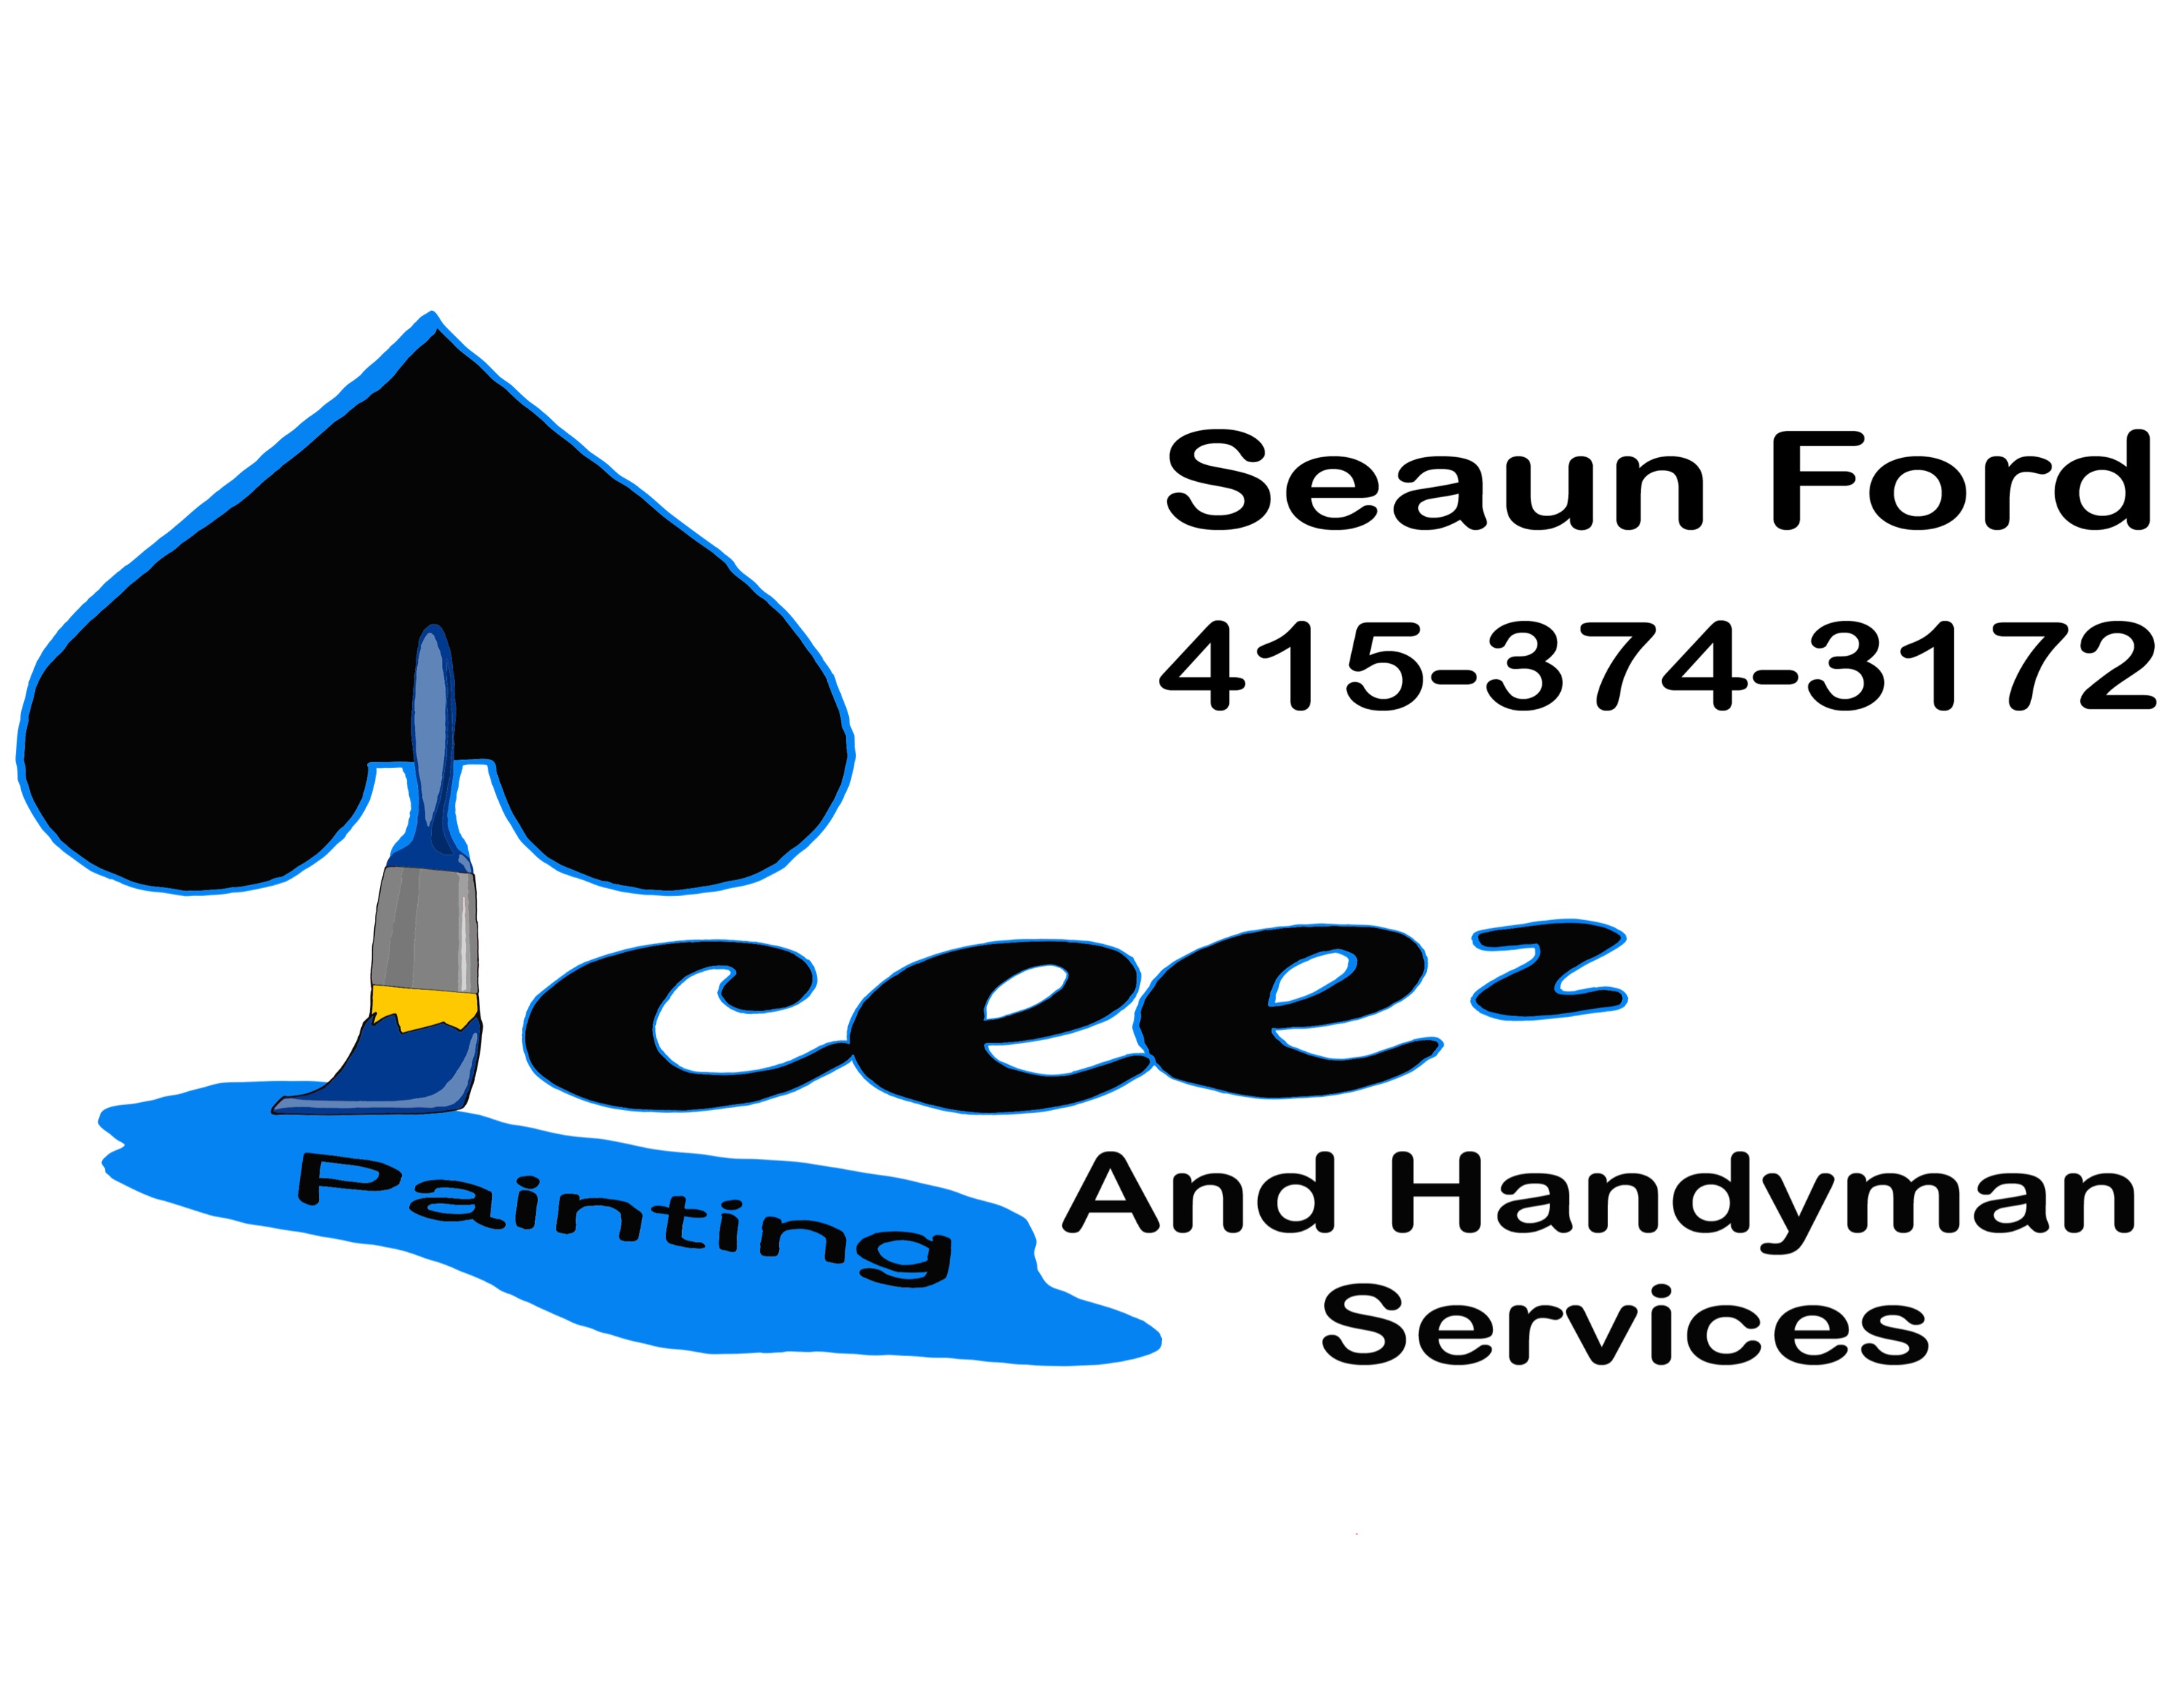 ACEEZ Painting And Handyman Services - Unlicensed Contractor Logo